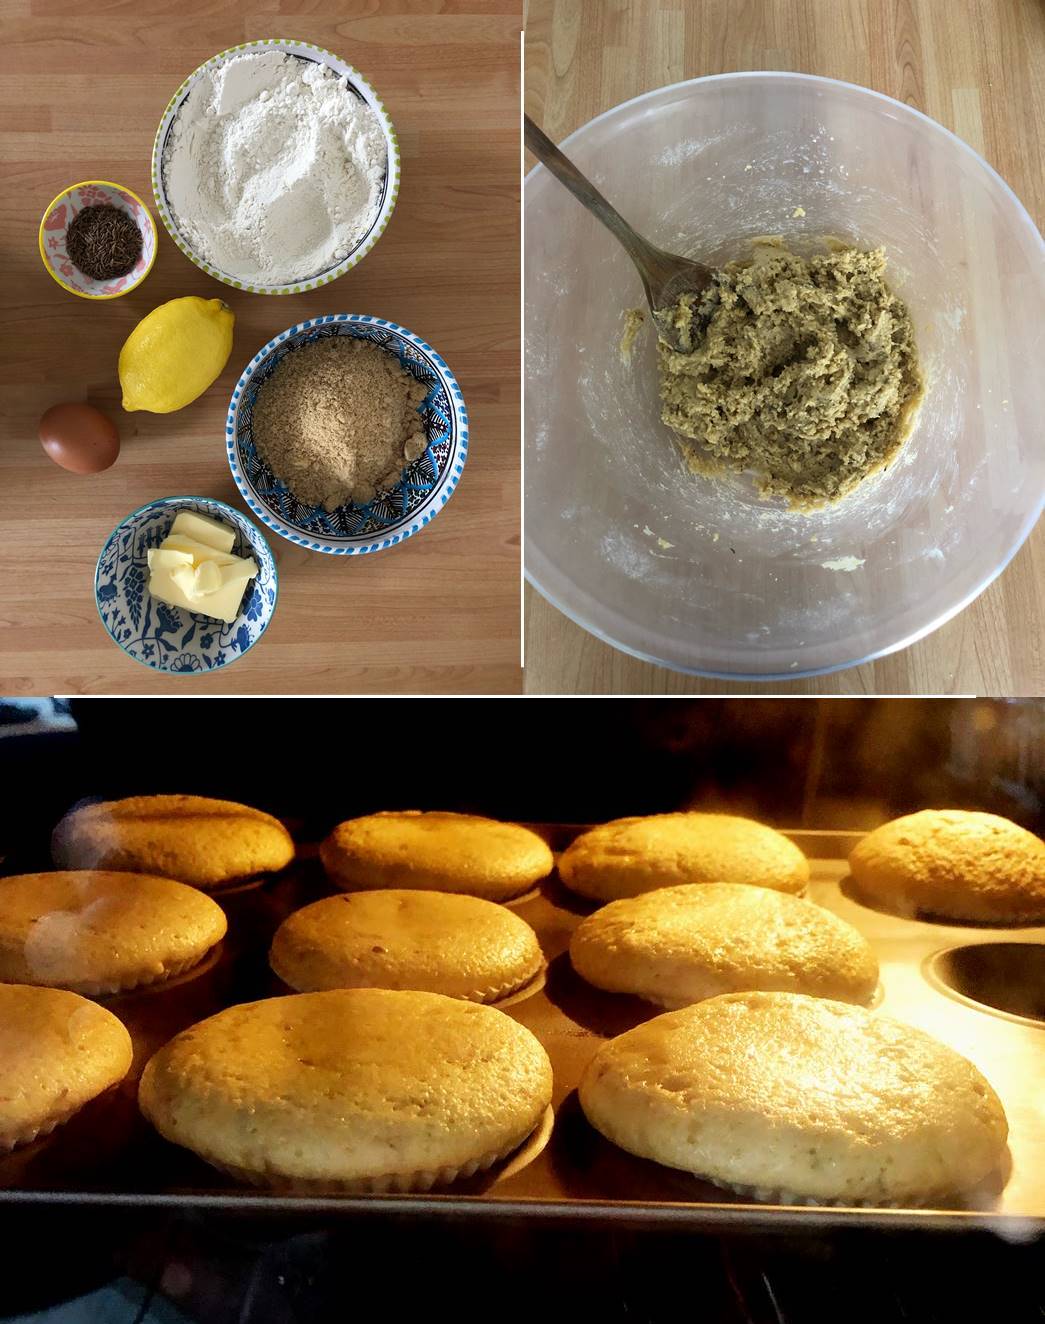 (Clockwise from left) The ingredients based on the original recipe, but down to a quarter; mixing the dry ingredients together to form a batter; and the muffins rising in the oven on baking. (Courtesy: Elizabeth Garnett)